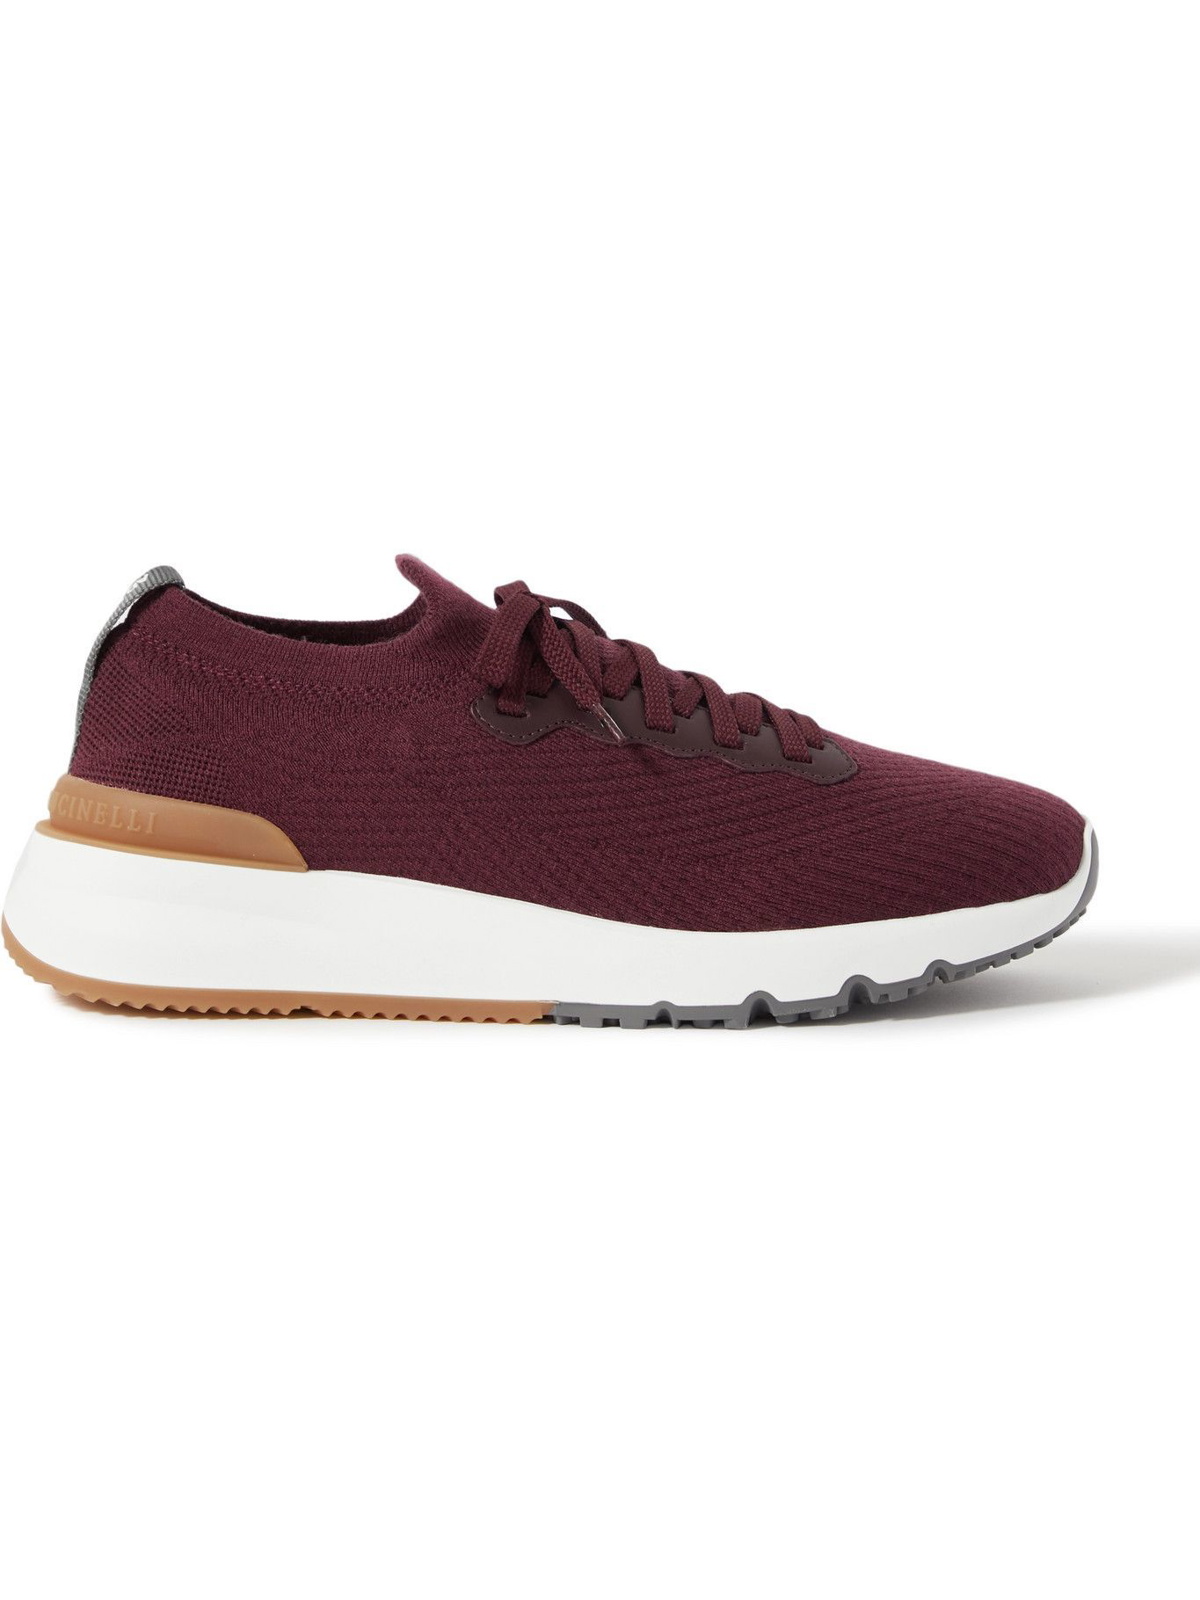 $745 Brunello Cucinelli Burgundy Red Leather Sneakers - 9/8